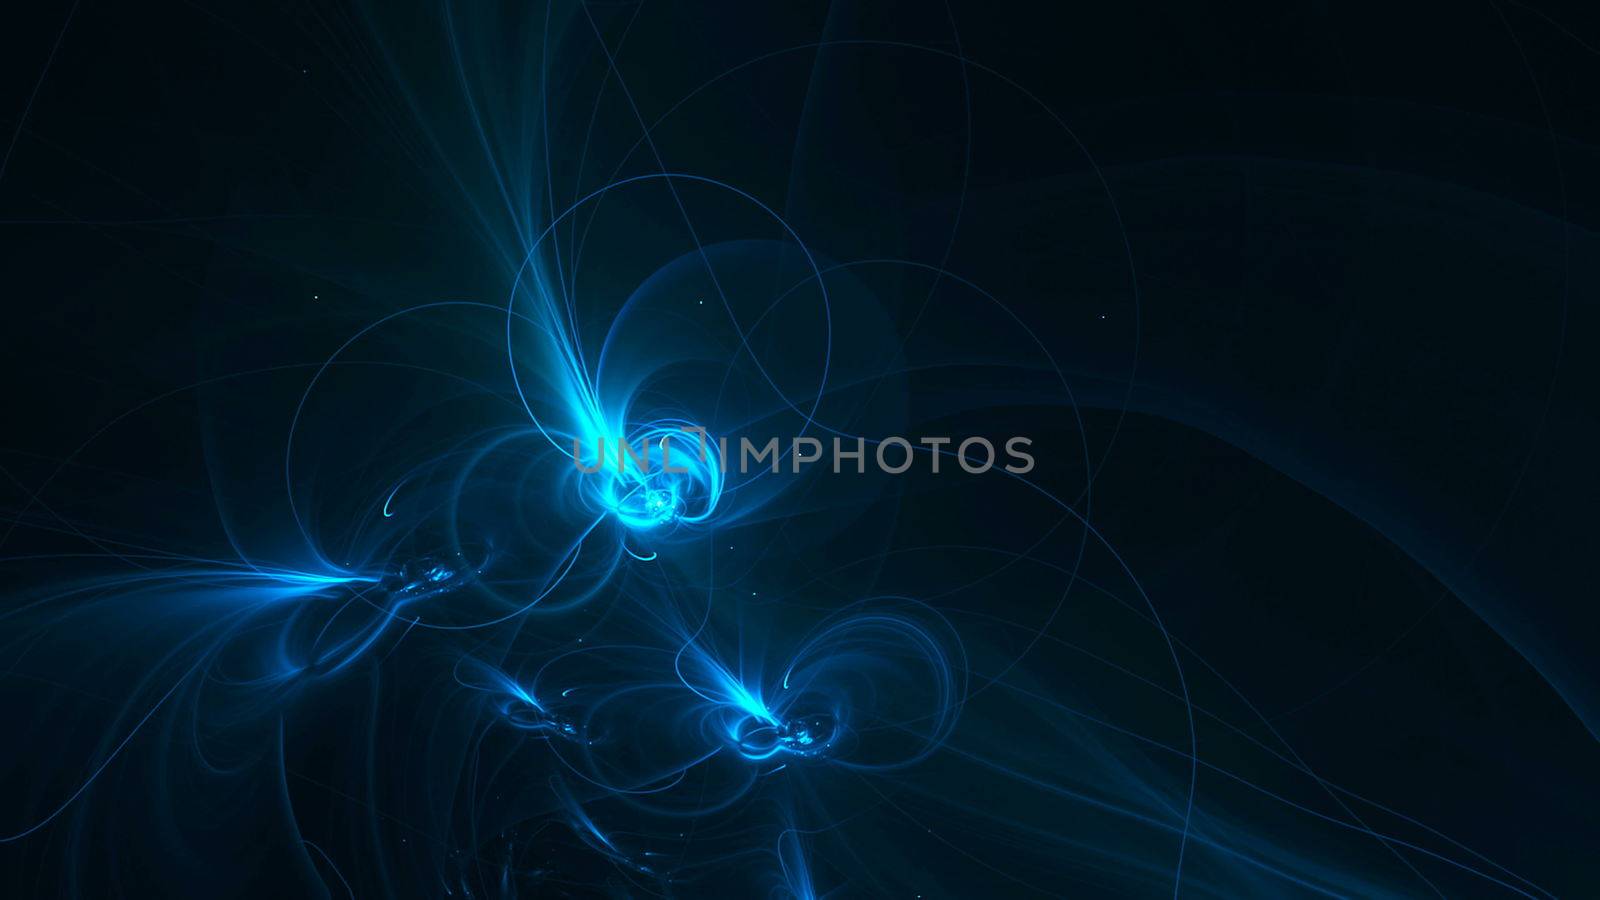 Abstract fractal background 3d rendering animation. Seamless loop by nolimit046